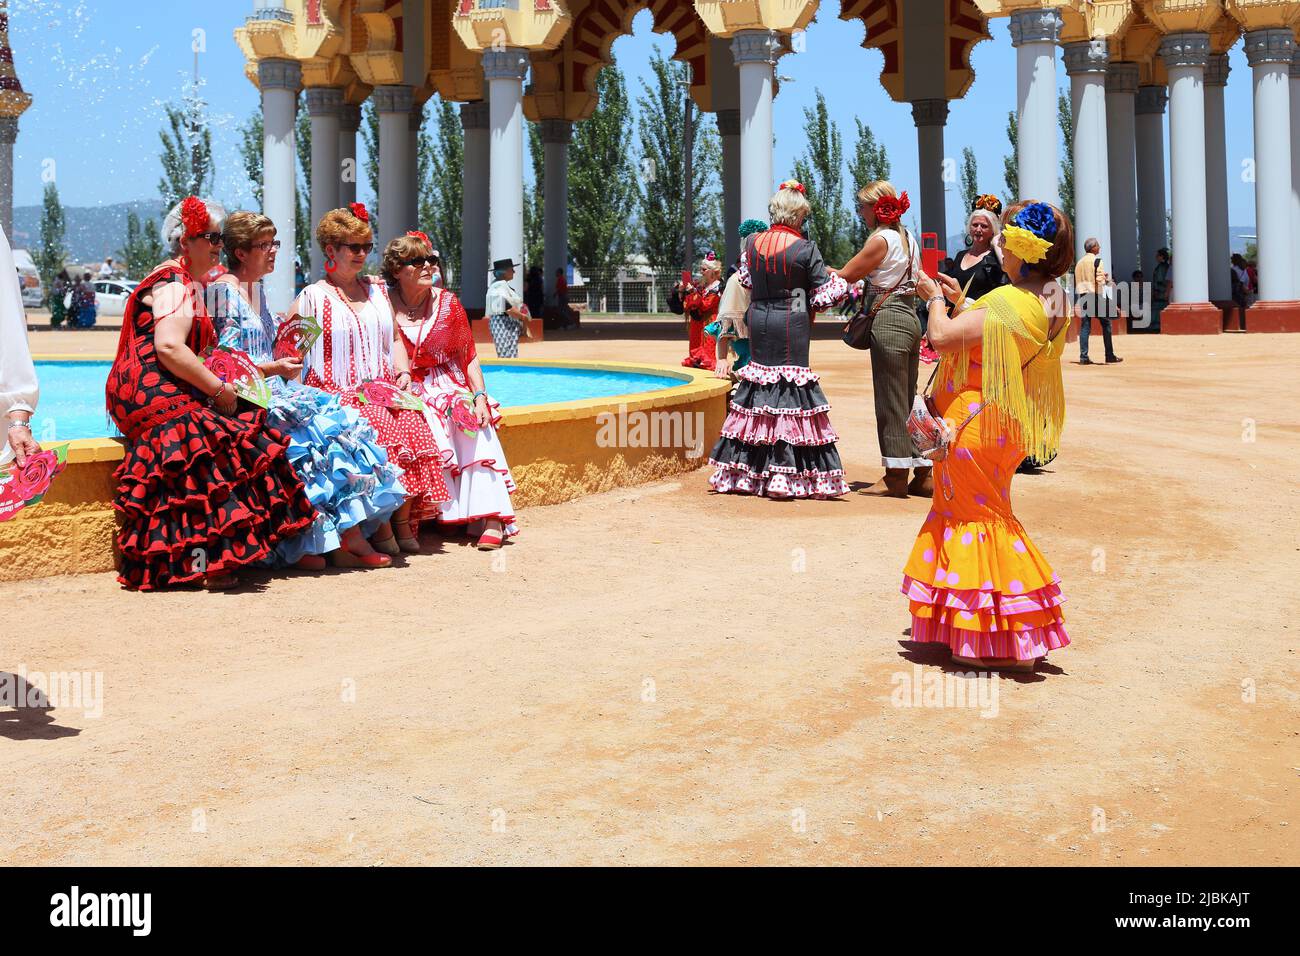 CORDOBA, SPAIN - MAY 23, 2017: Unidentified women in colorful national dresses take photos at the Feria festival site. Stock Photo